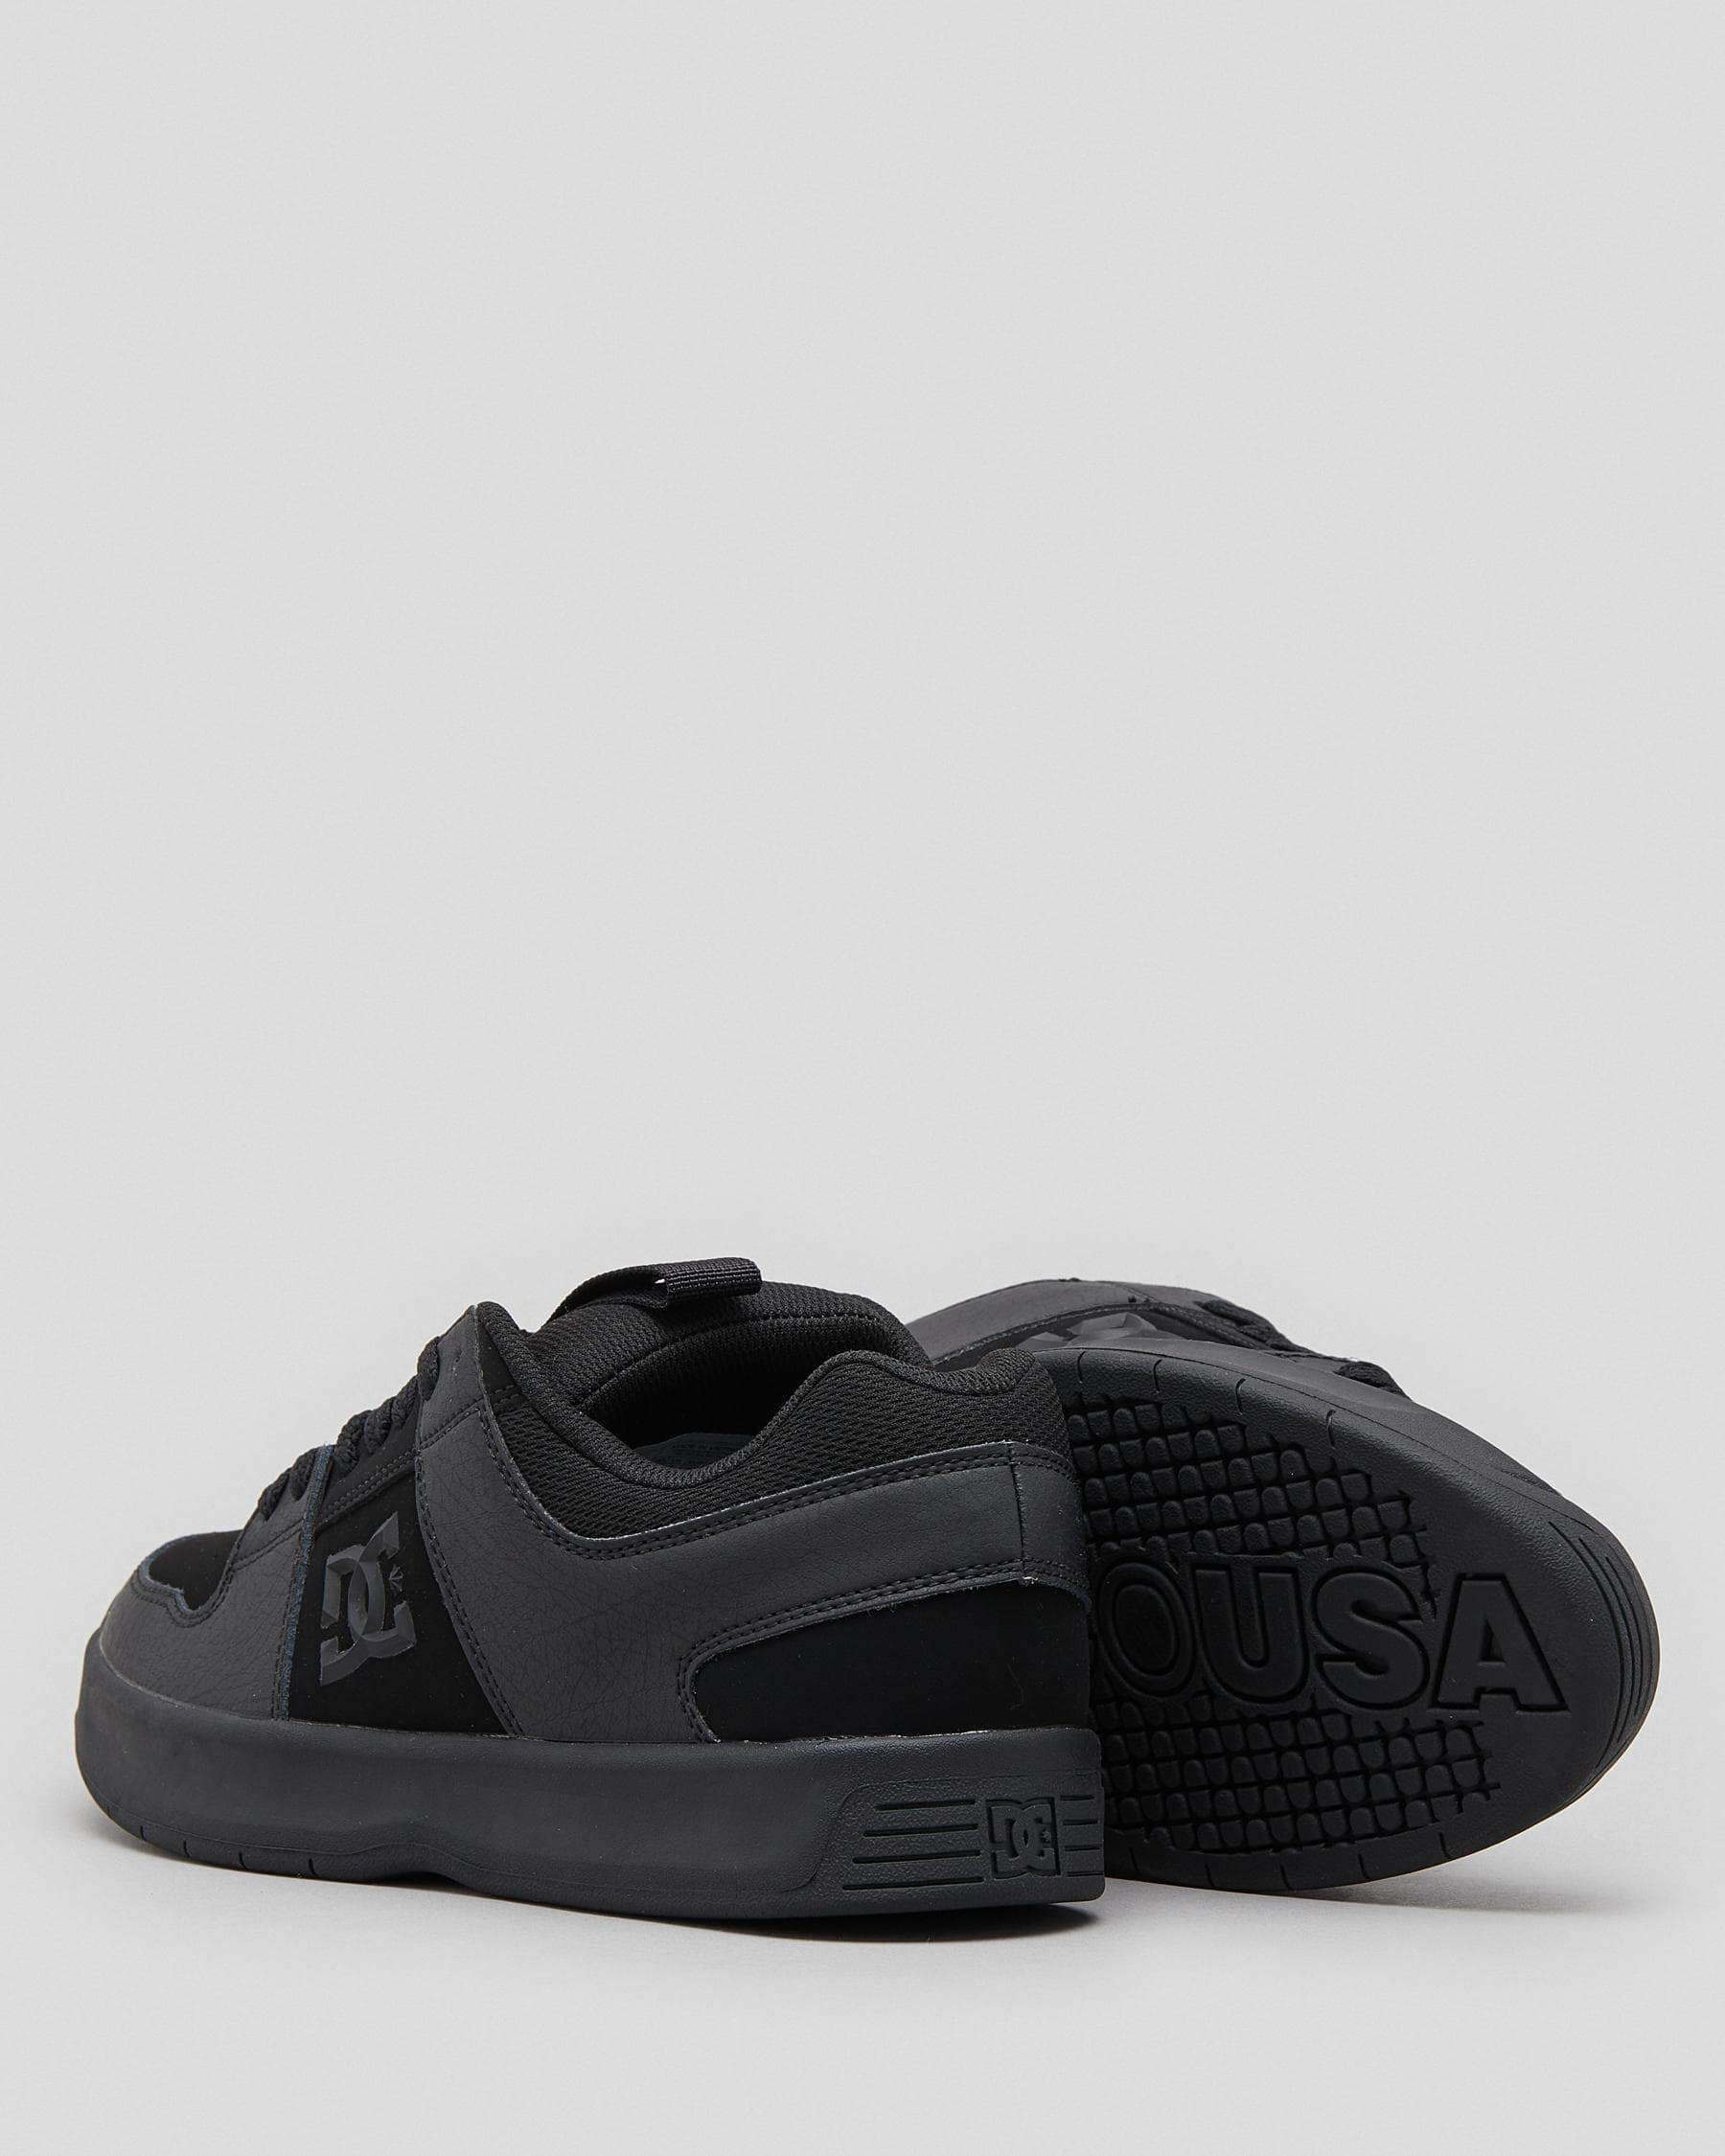 DC Shoes Lynx Zero Shoes In Black/black/black - Fast Shipping & Easy ...